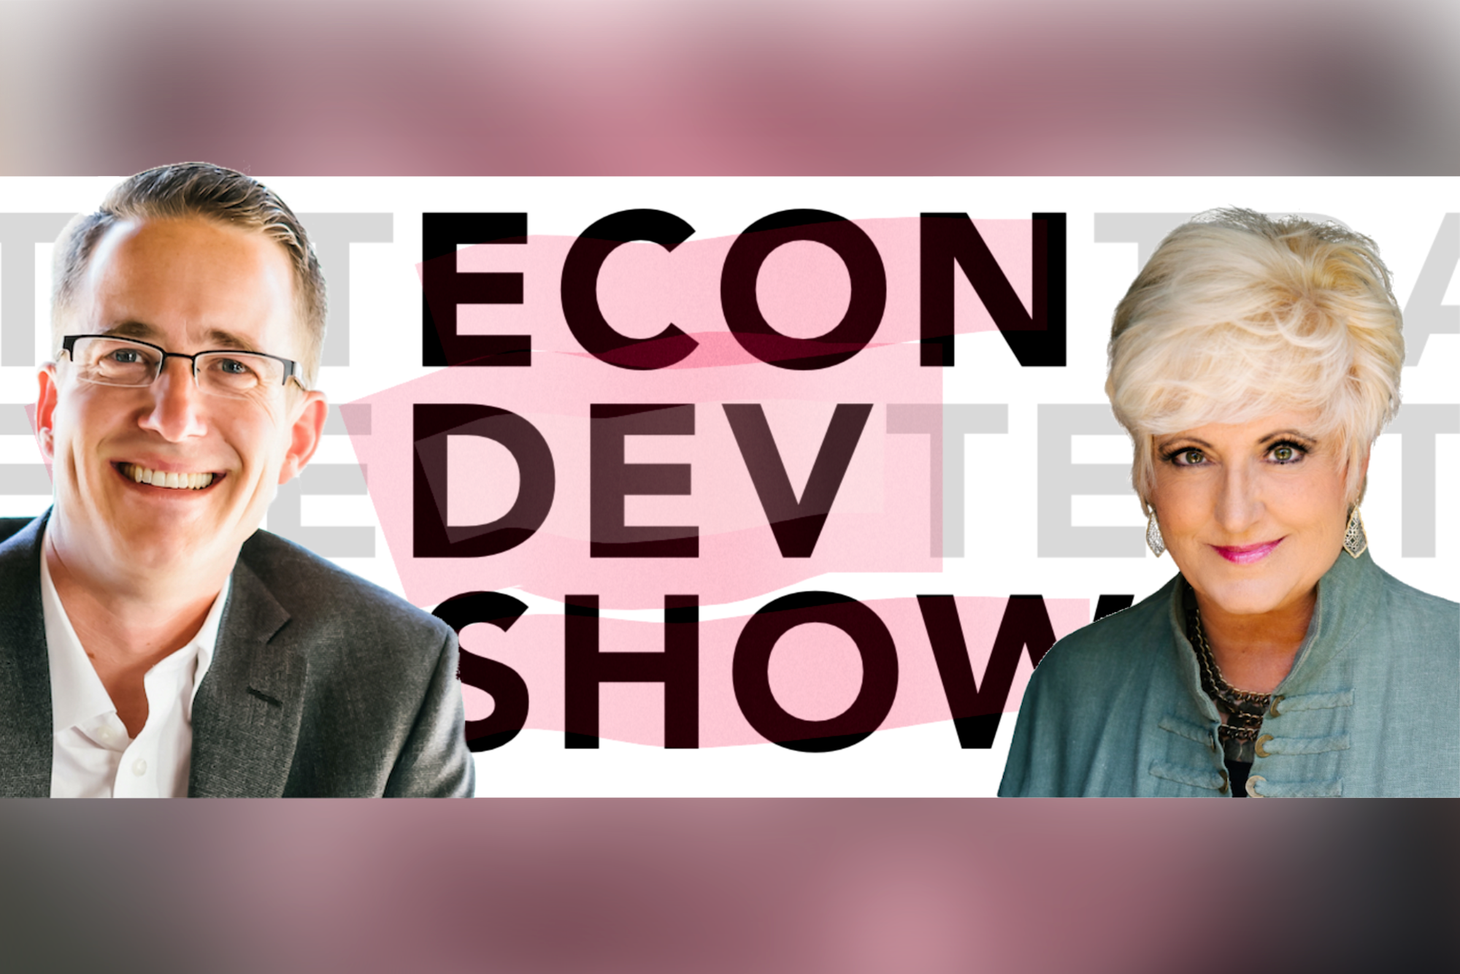 Podcast Episode #132: Championing Rural Economic Development with Lorie Vincent and Stand Up Rural America